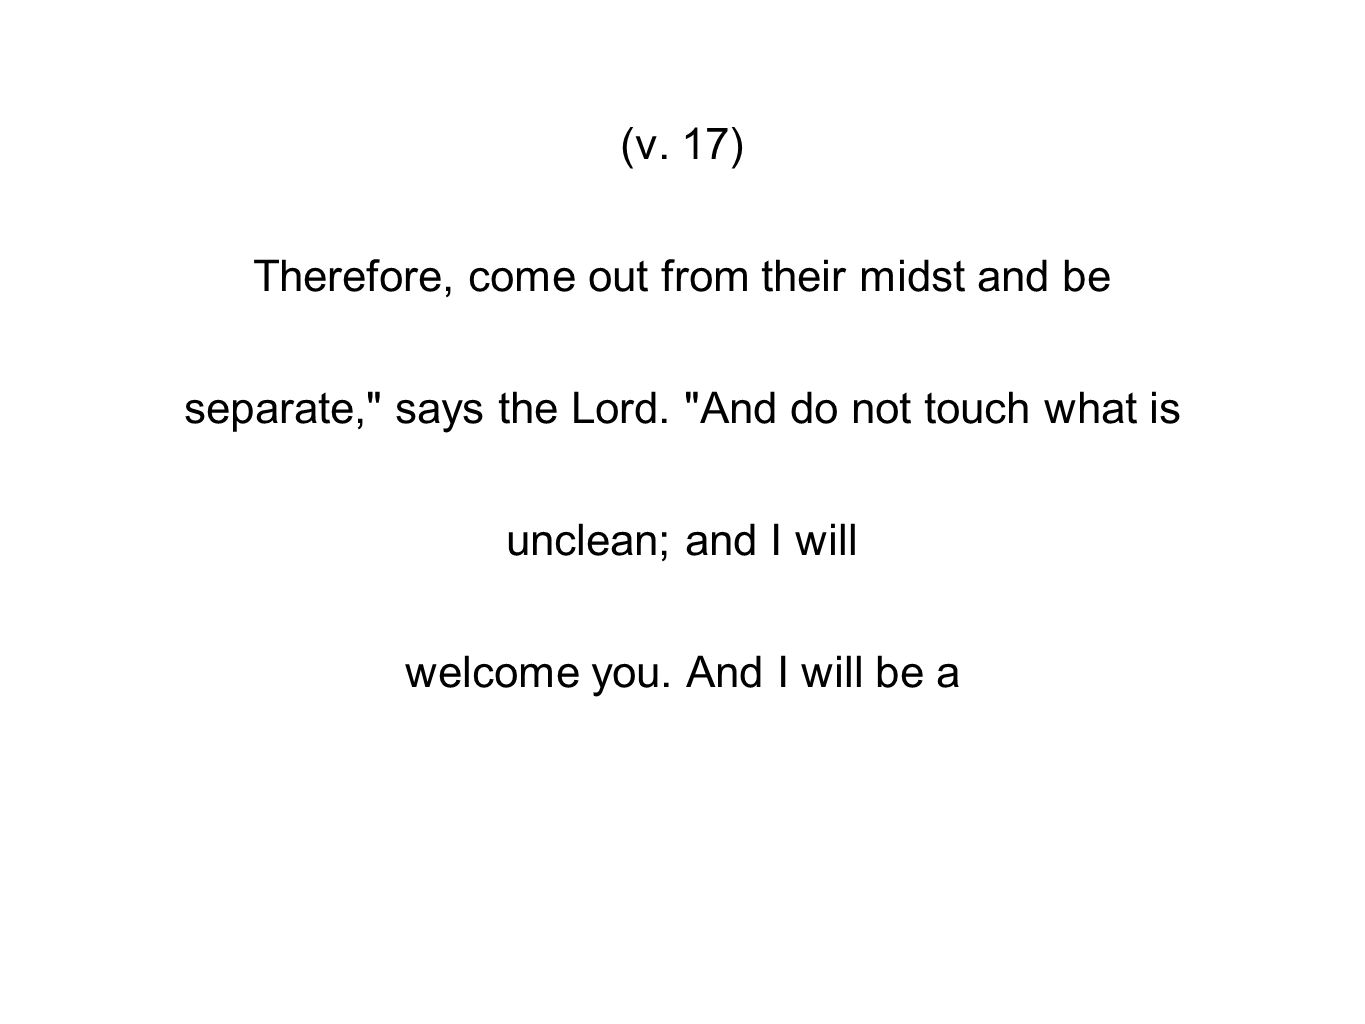 (v. 17) Therefore, come out from their midst and be separate, says the Lord.